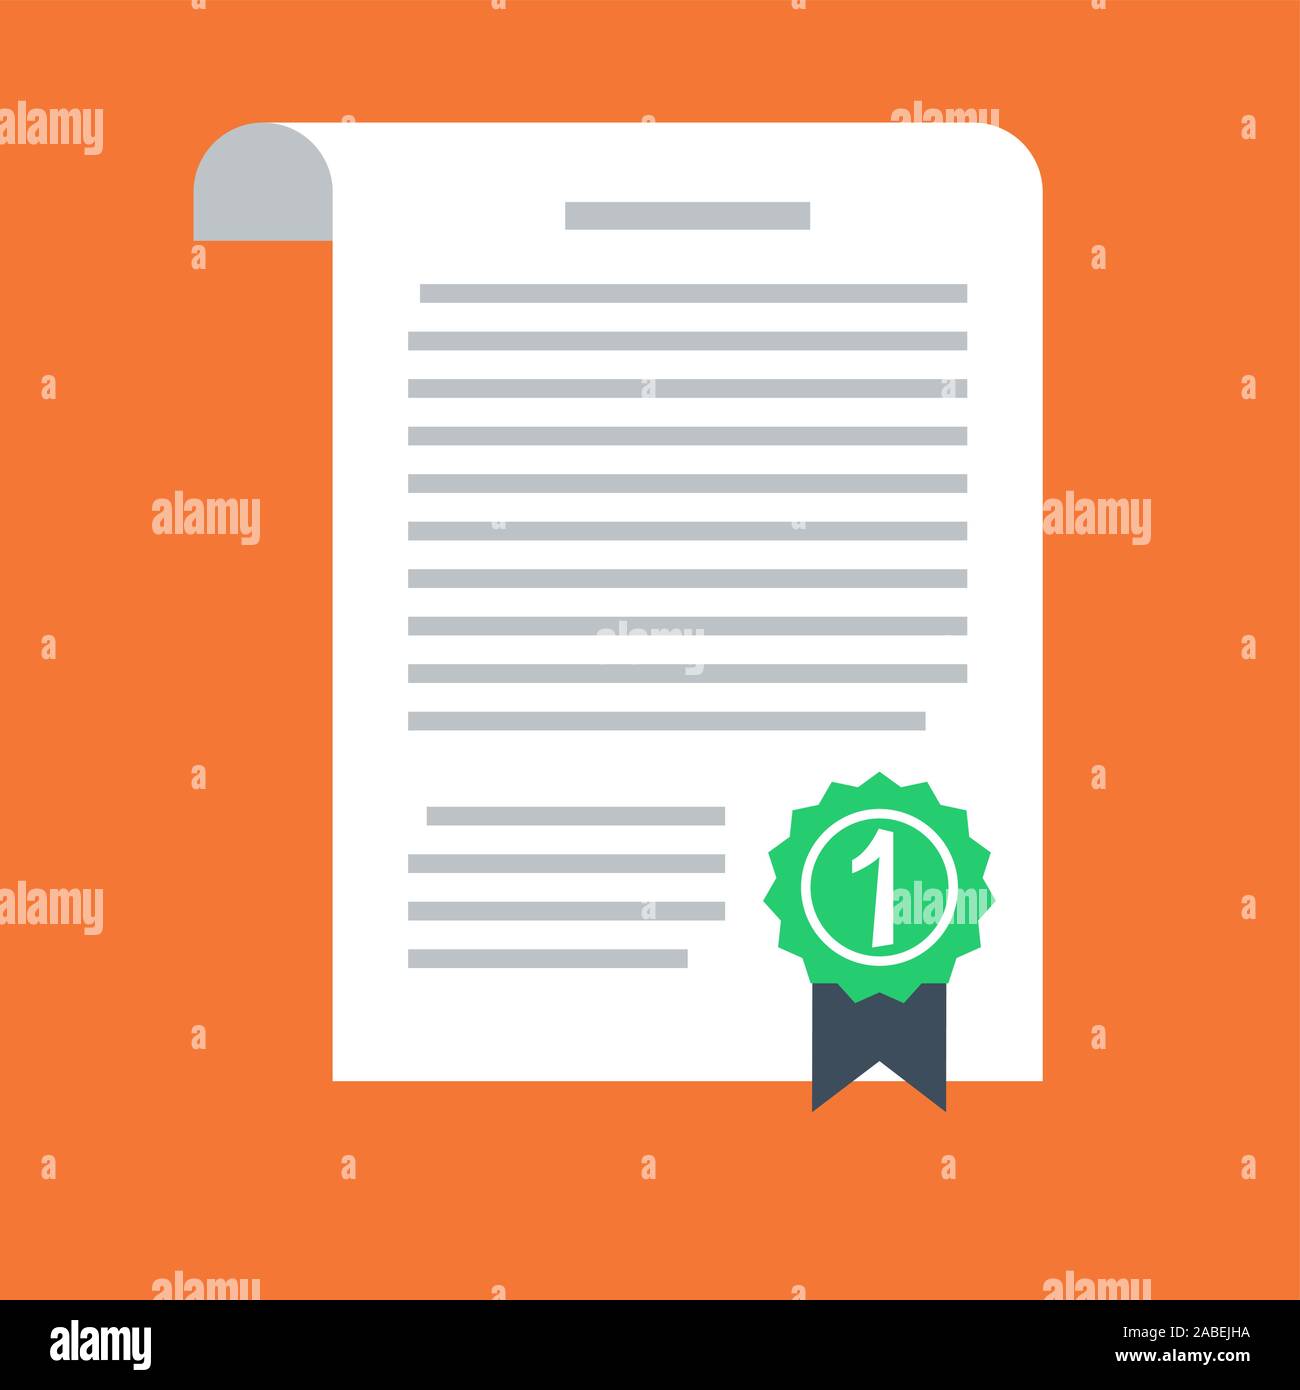 Contract vector icon in a flat style isolated on a colored background. Stock Vector